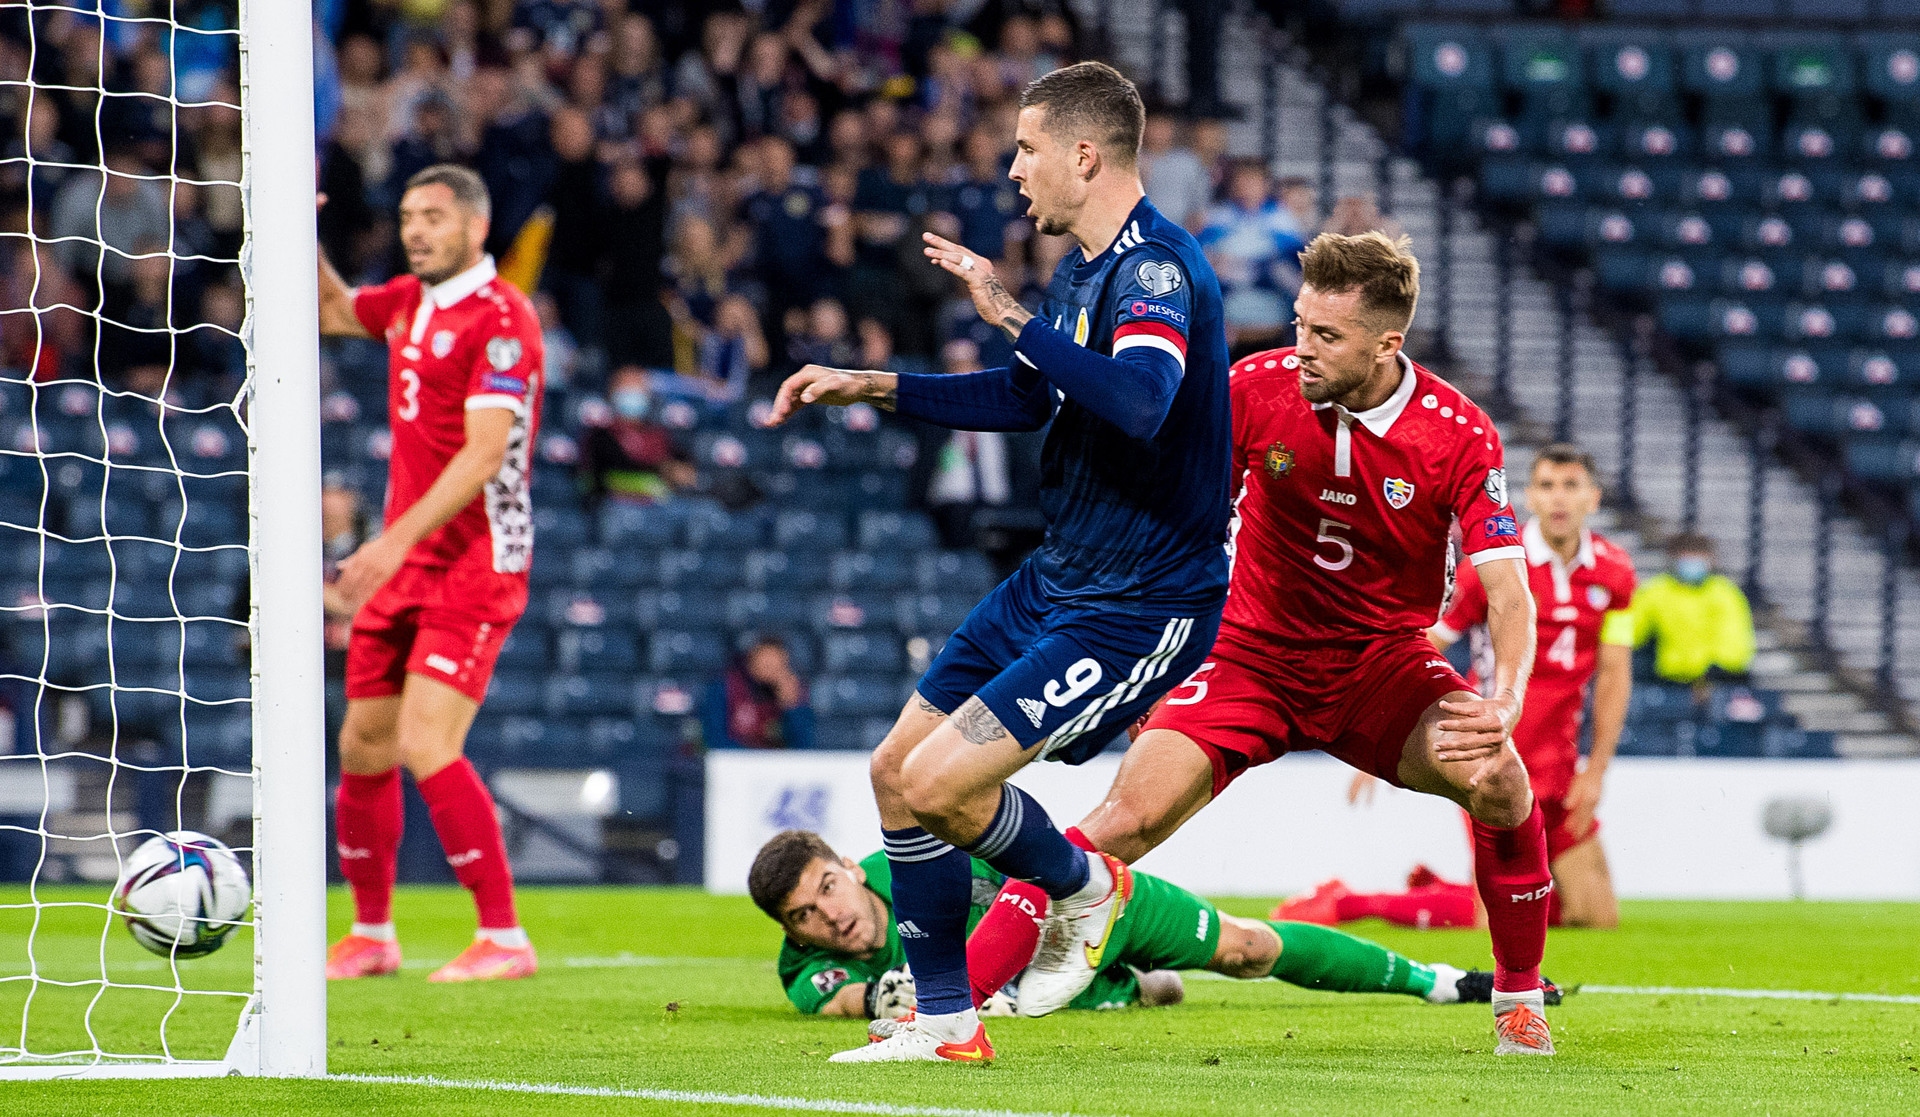 <strong>Nerves were seemingly settled at Hampden when Lyndon Dykes prodded home an early goal – but it became a long night for the Tartan Army as Scotland failed to put the Moldovans to the sword despite a string of good chances.</strong>” /><span class=